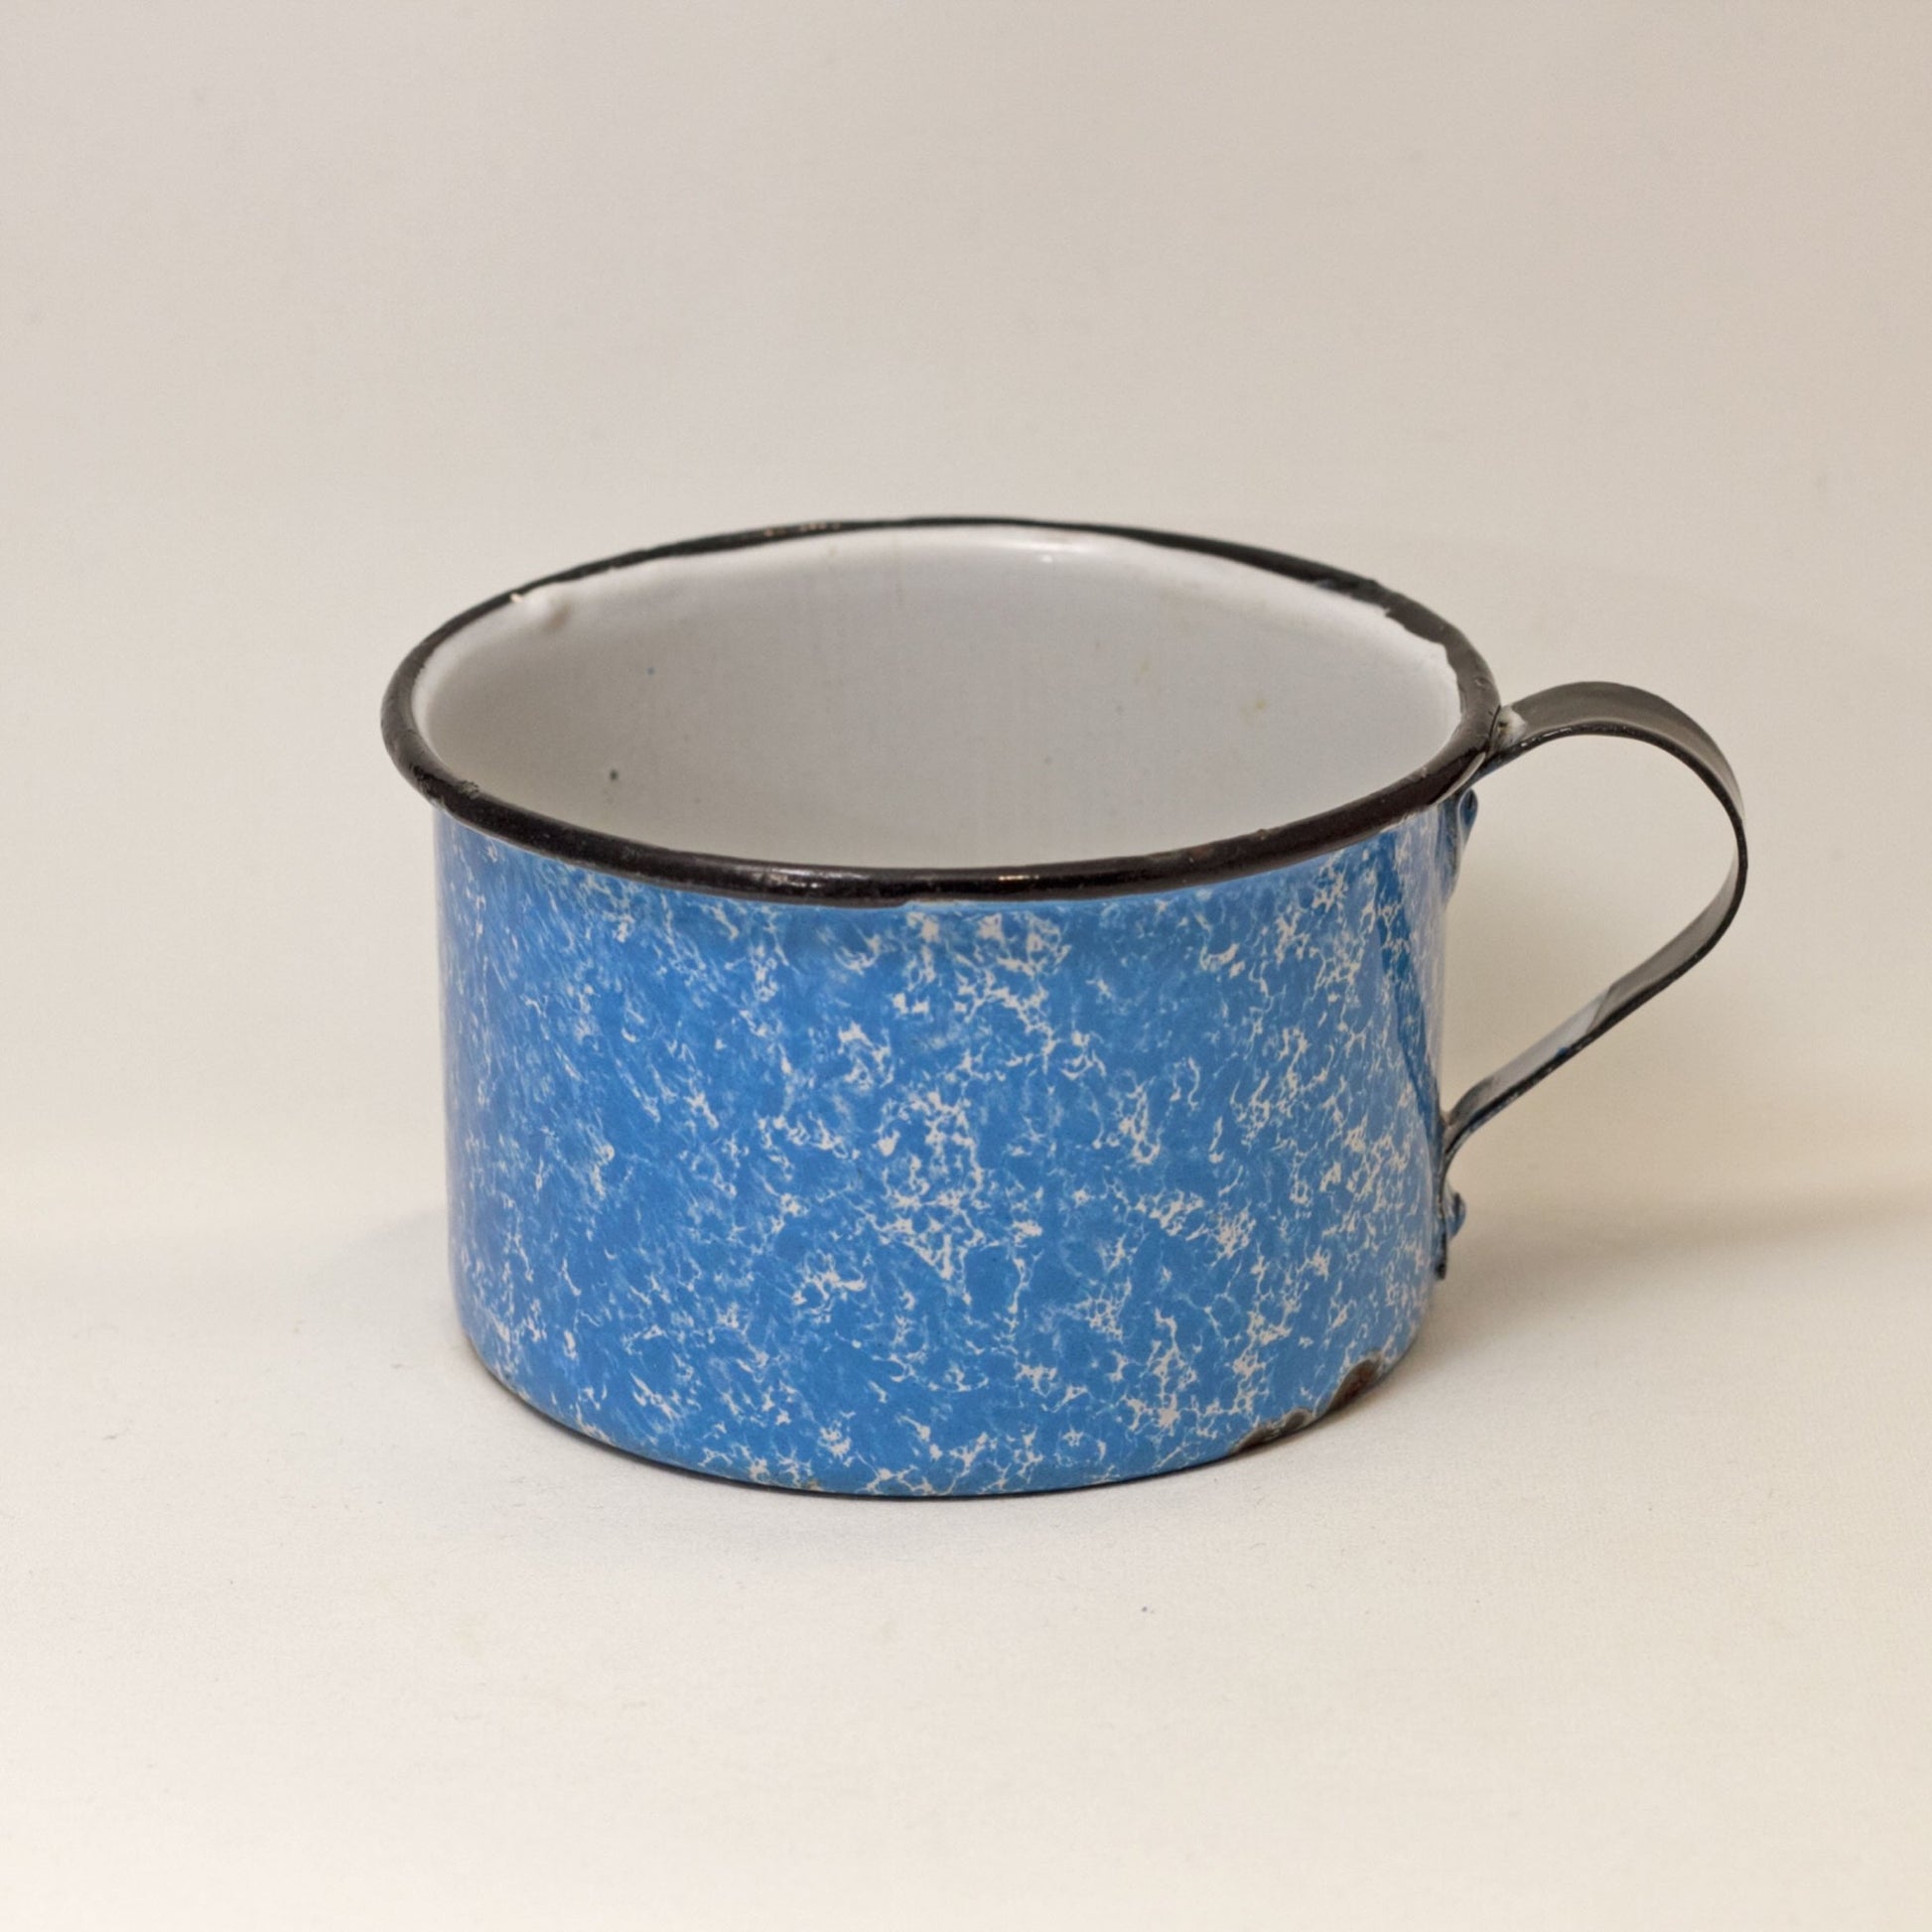 Antique GRANITE WARE 16-OUNCE CUP Vintage Blue and White Speckled